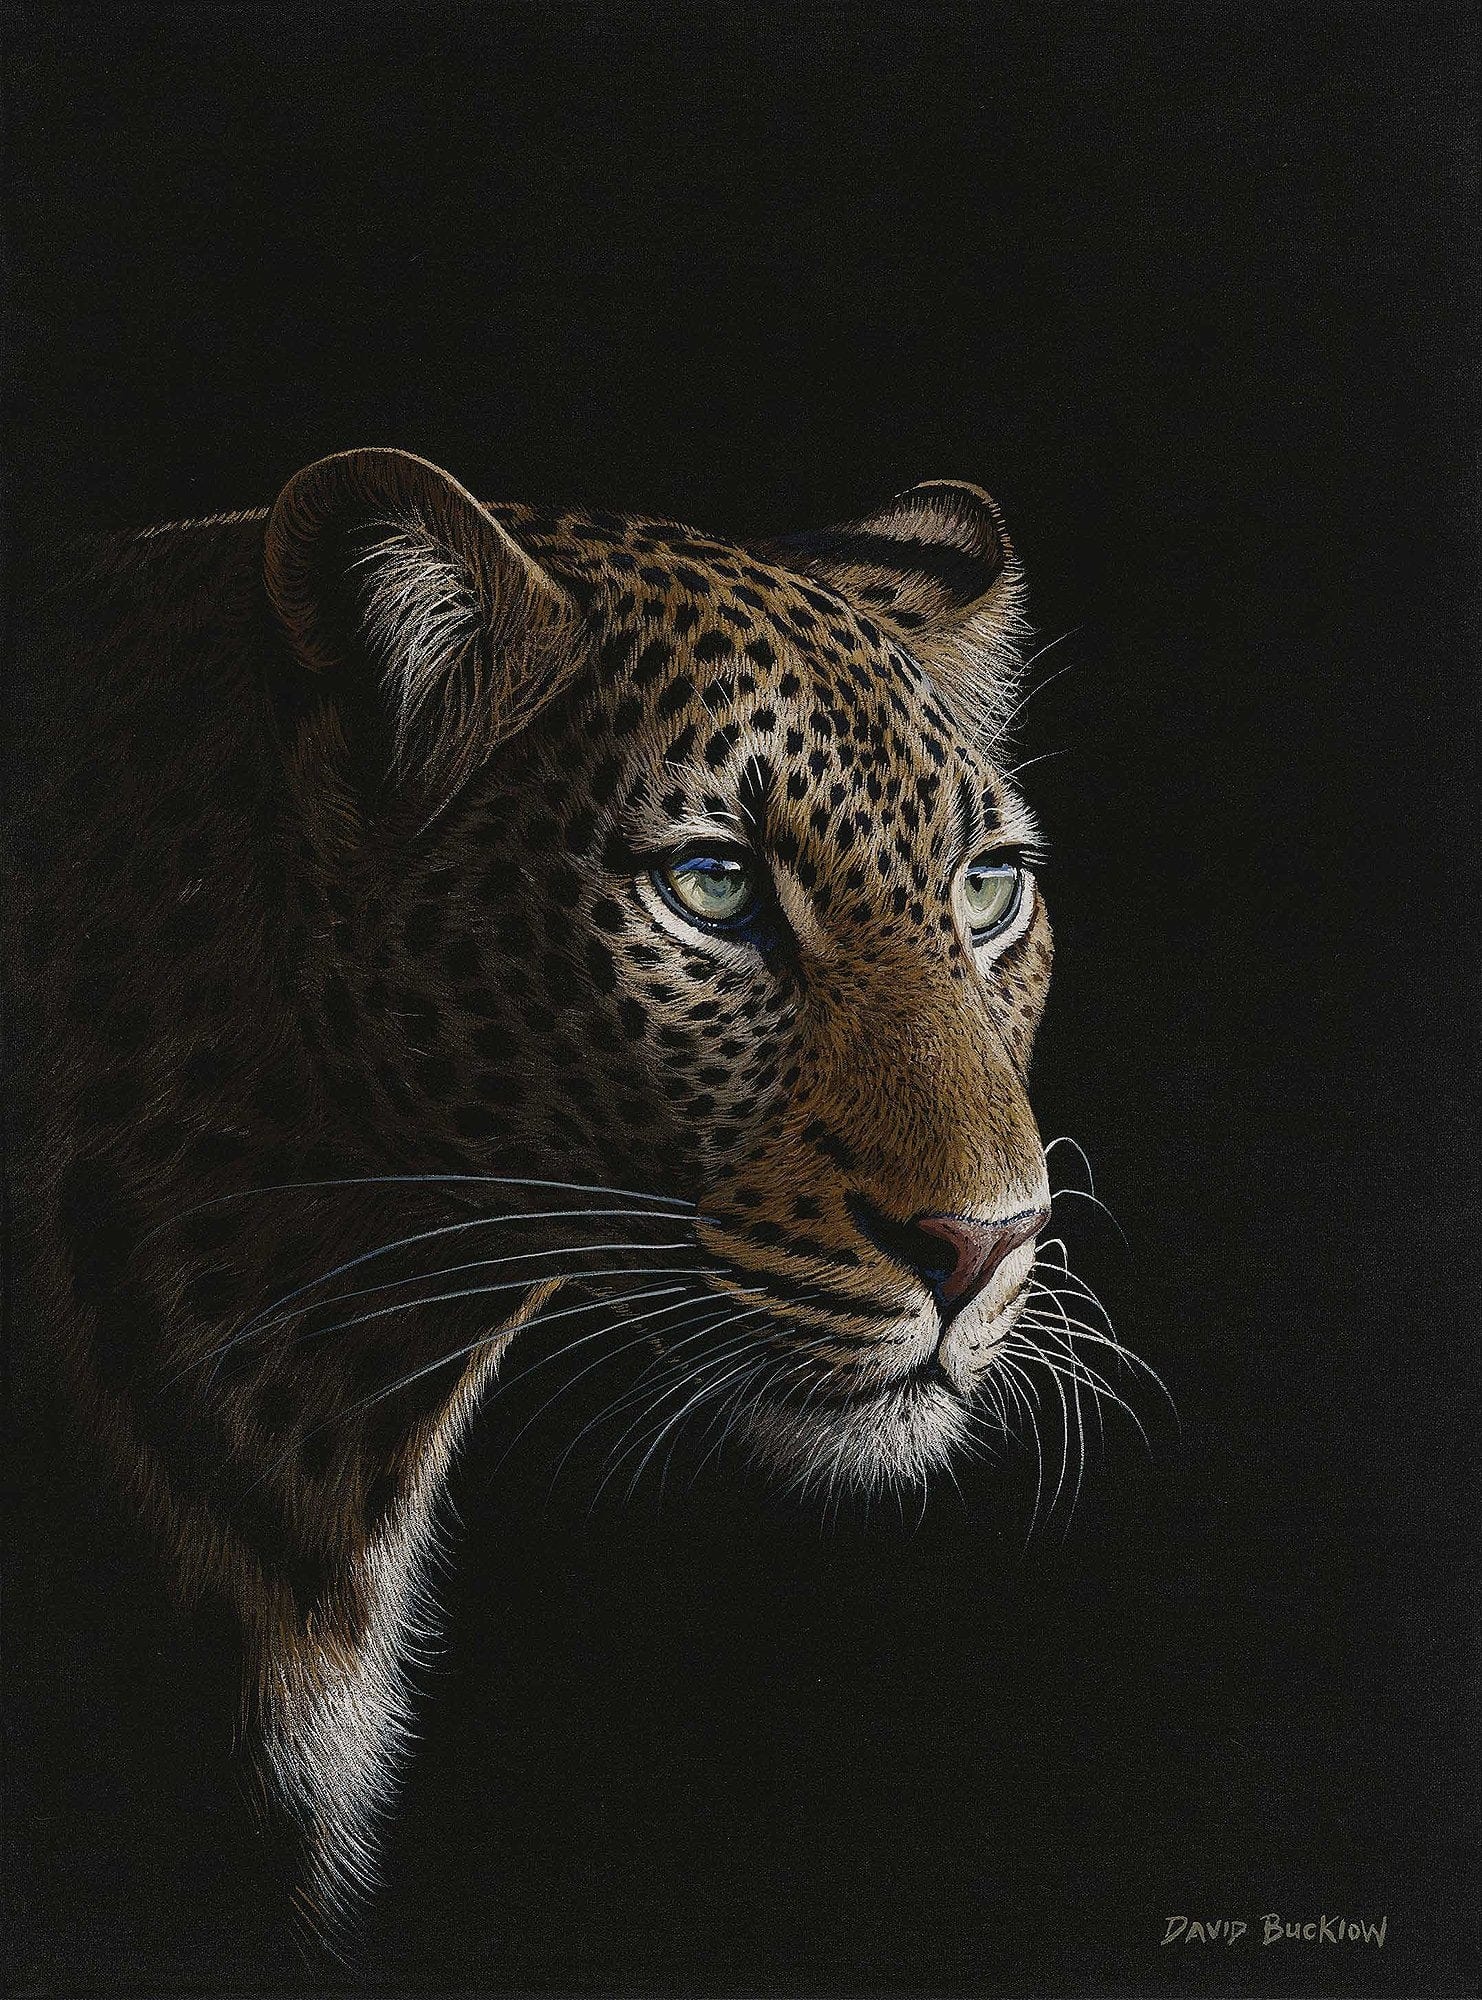 Leopard painting fine art print of a leopard at night entitled Patiently Waiting by David Bucklow artist